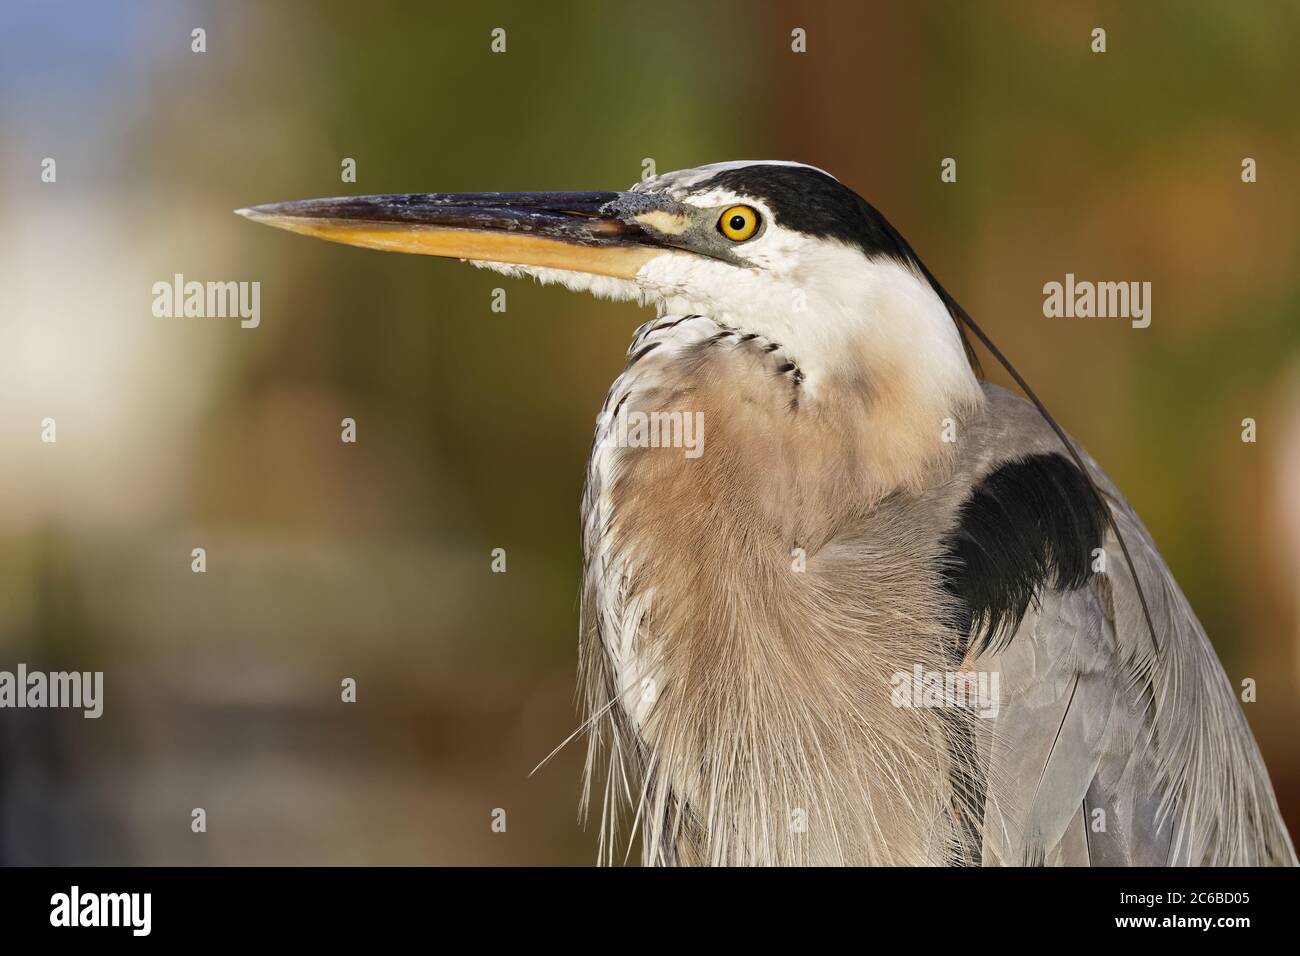 Portrait of a stately and elegant Great Blue Heron (Ardea herodias) captured during golden hour on a warm, Florida summer evening. Stock Photo